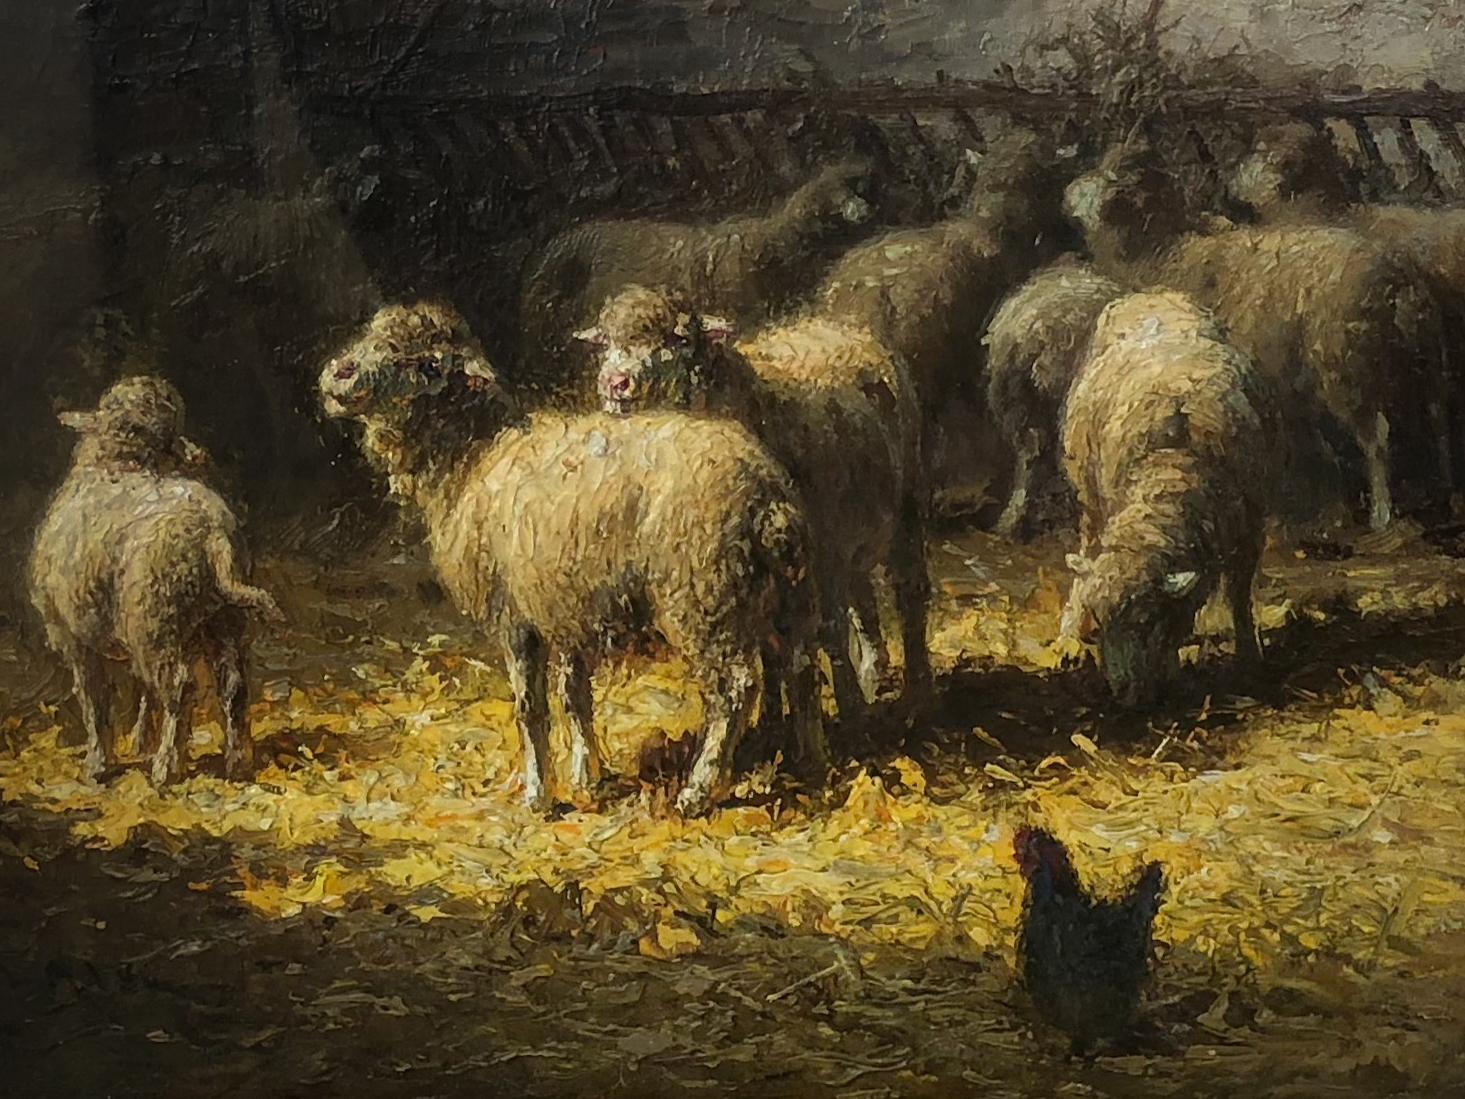 Sheep in Barn Relishing Sunlight - Painting by Charles Clair